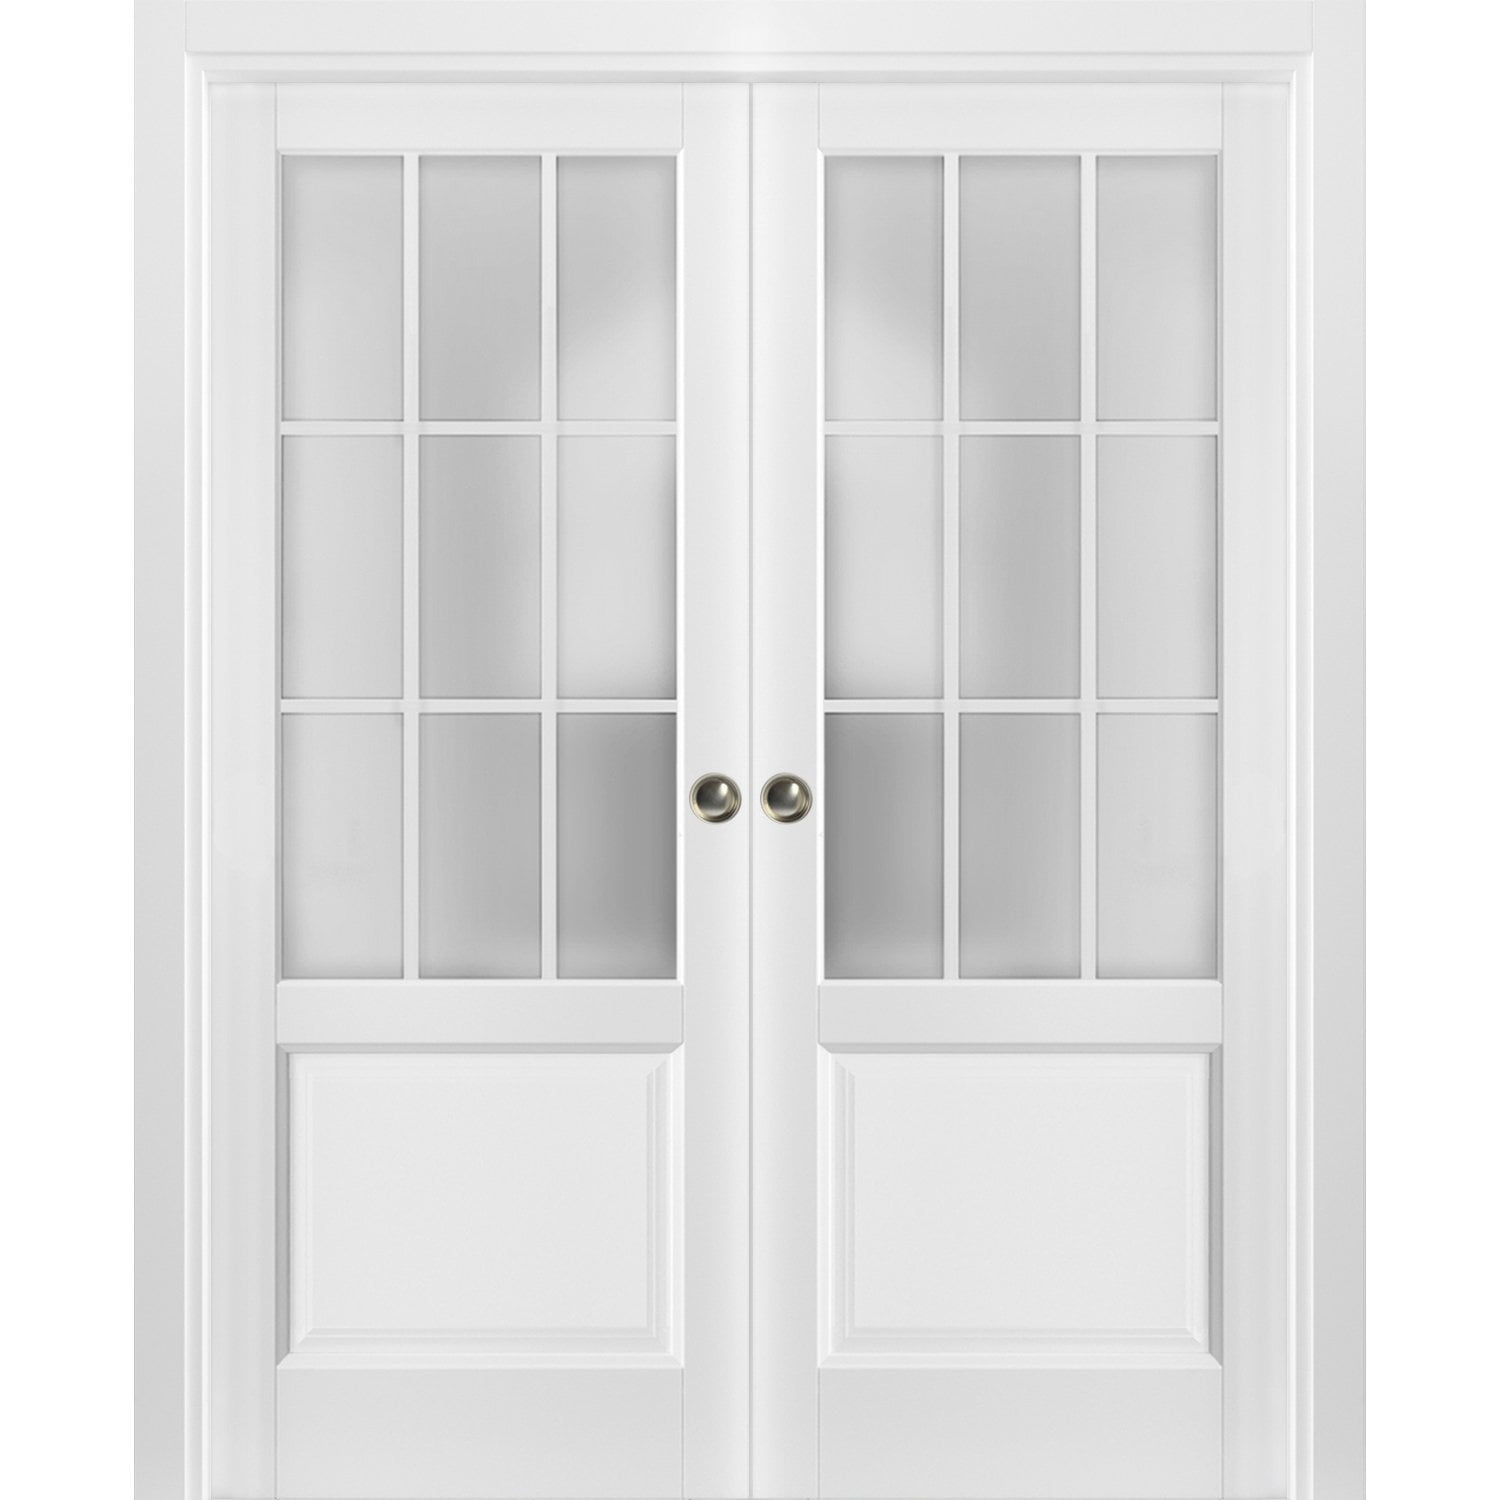 Sliding French Double Pocket Doors 60 x 80 inches Frosted Glass 9 Lites ...